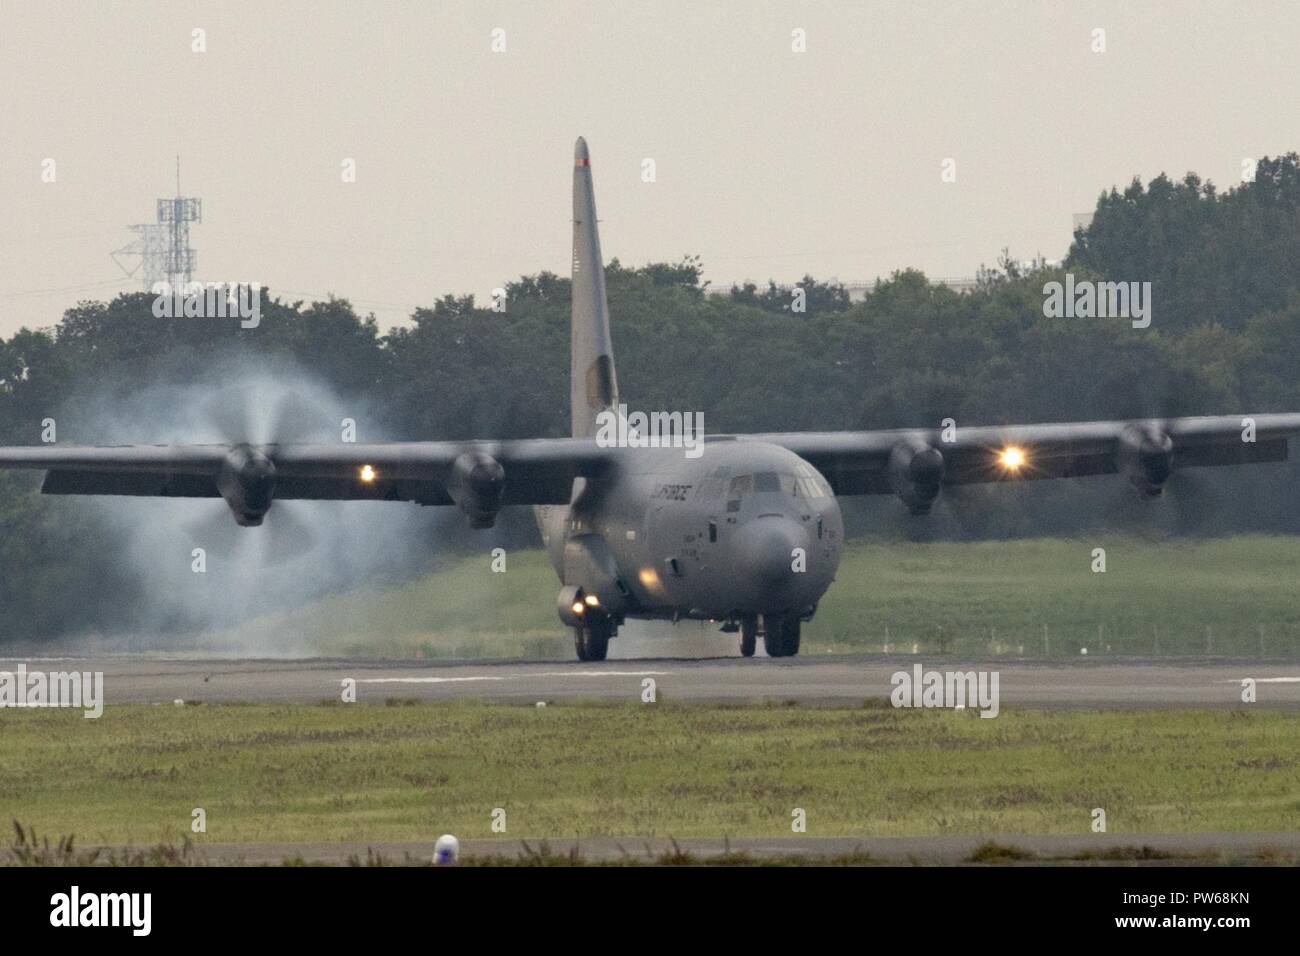 A C-130J Super Hercules touches down at Yokota Air Base, Japan, Sept. 20, 2017. This is the fifth C-130J delivered to Yokota and the first from Ramstein Air Base. Crewmembers from the 36th Airlift Squadron flew halfway around the world to deliver an aircraft here. Yokota serves as the primary Western Pacific airlift hub for U.S. Air Force peacetime and contingency operations. Missions include tactical airland, airdrop, aeromedical evacuation, special operations and distinguished visitor airlift. Stock Photo